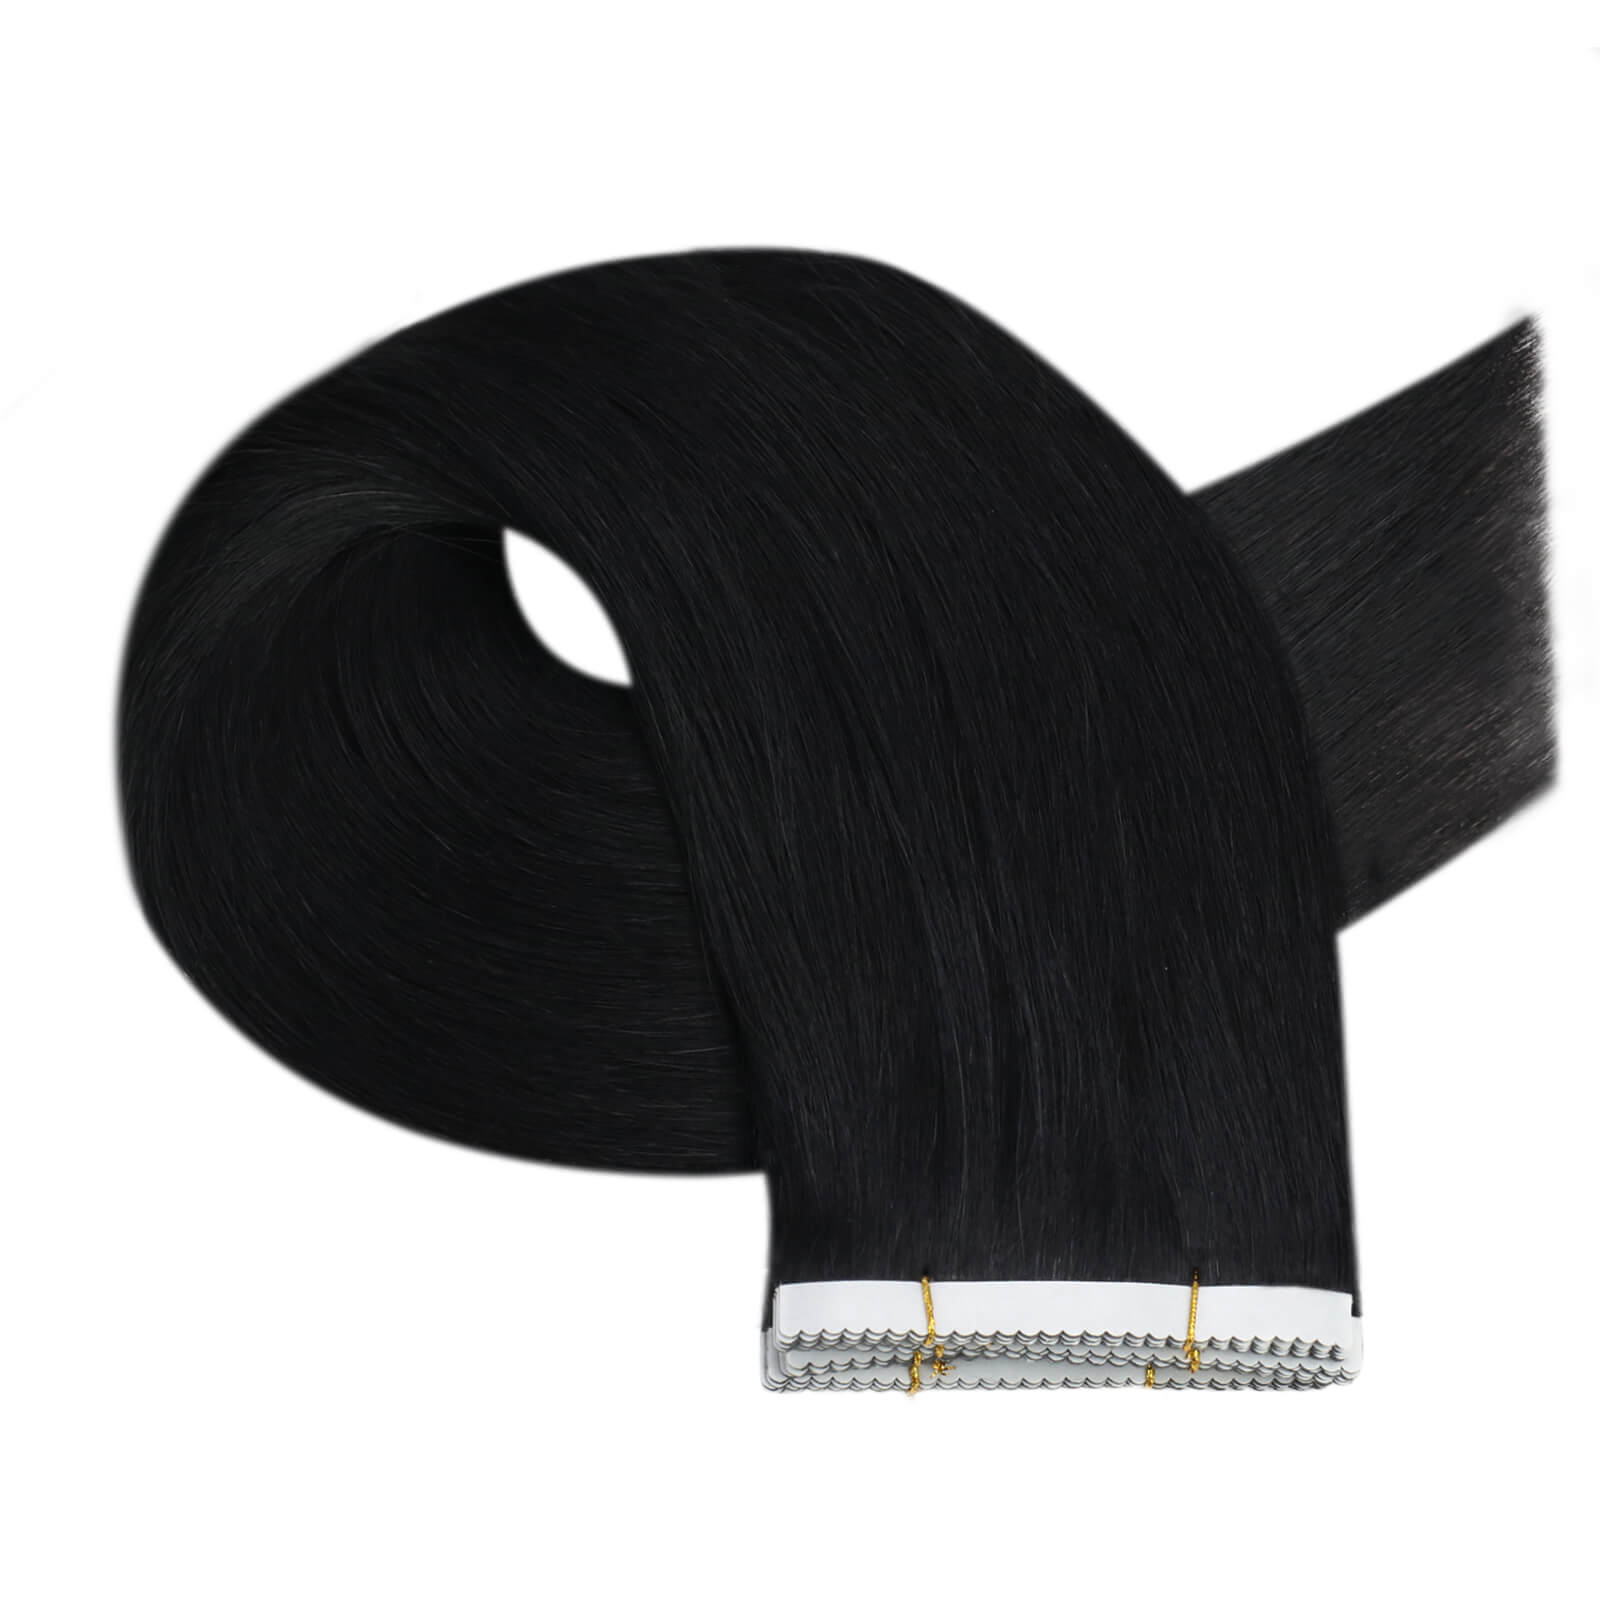 Virgin injection hair extensions black